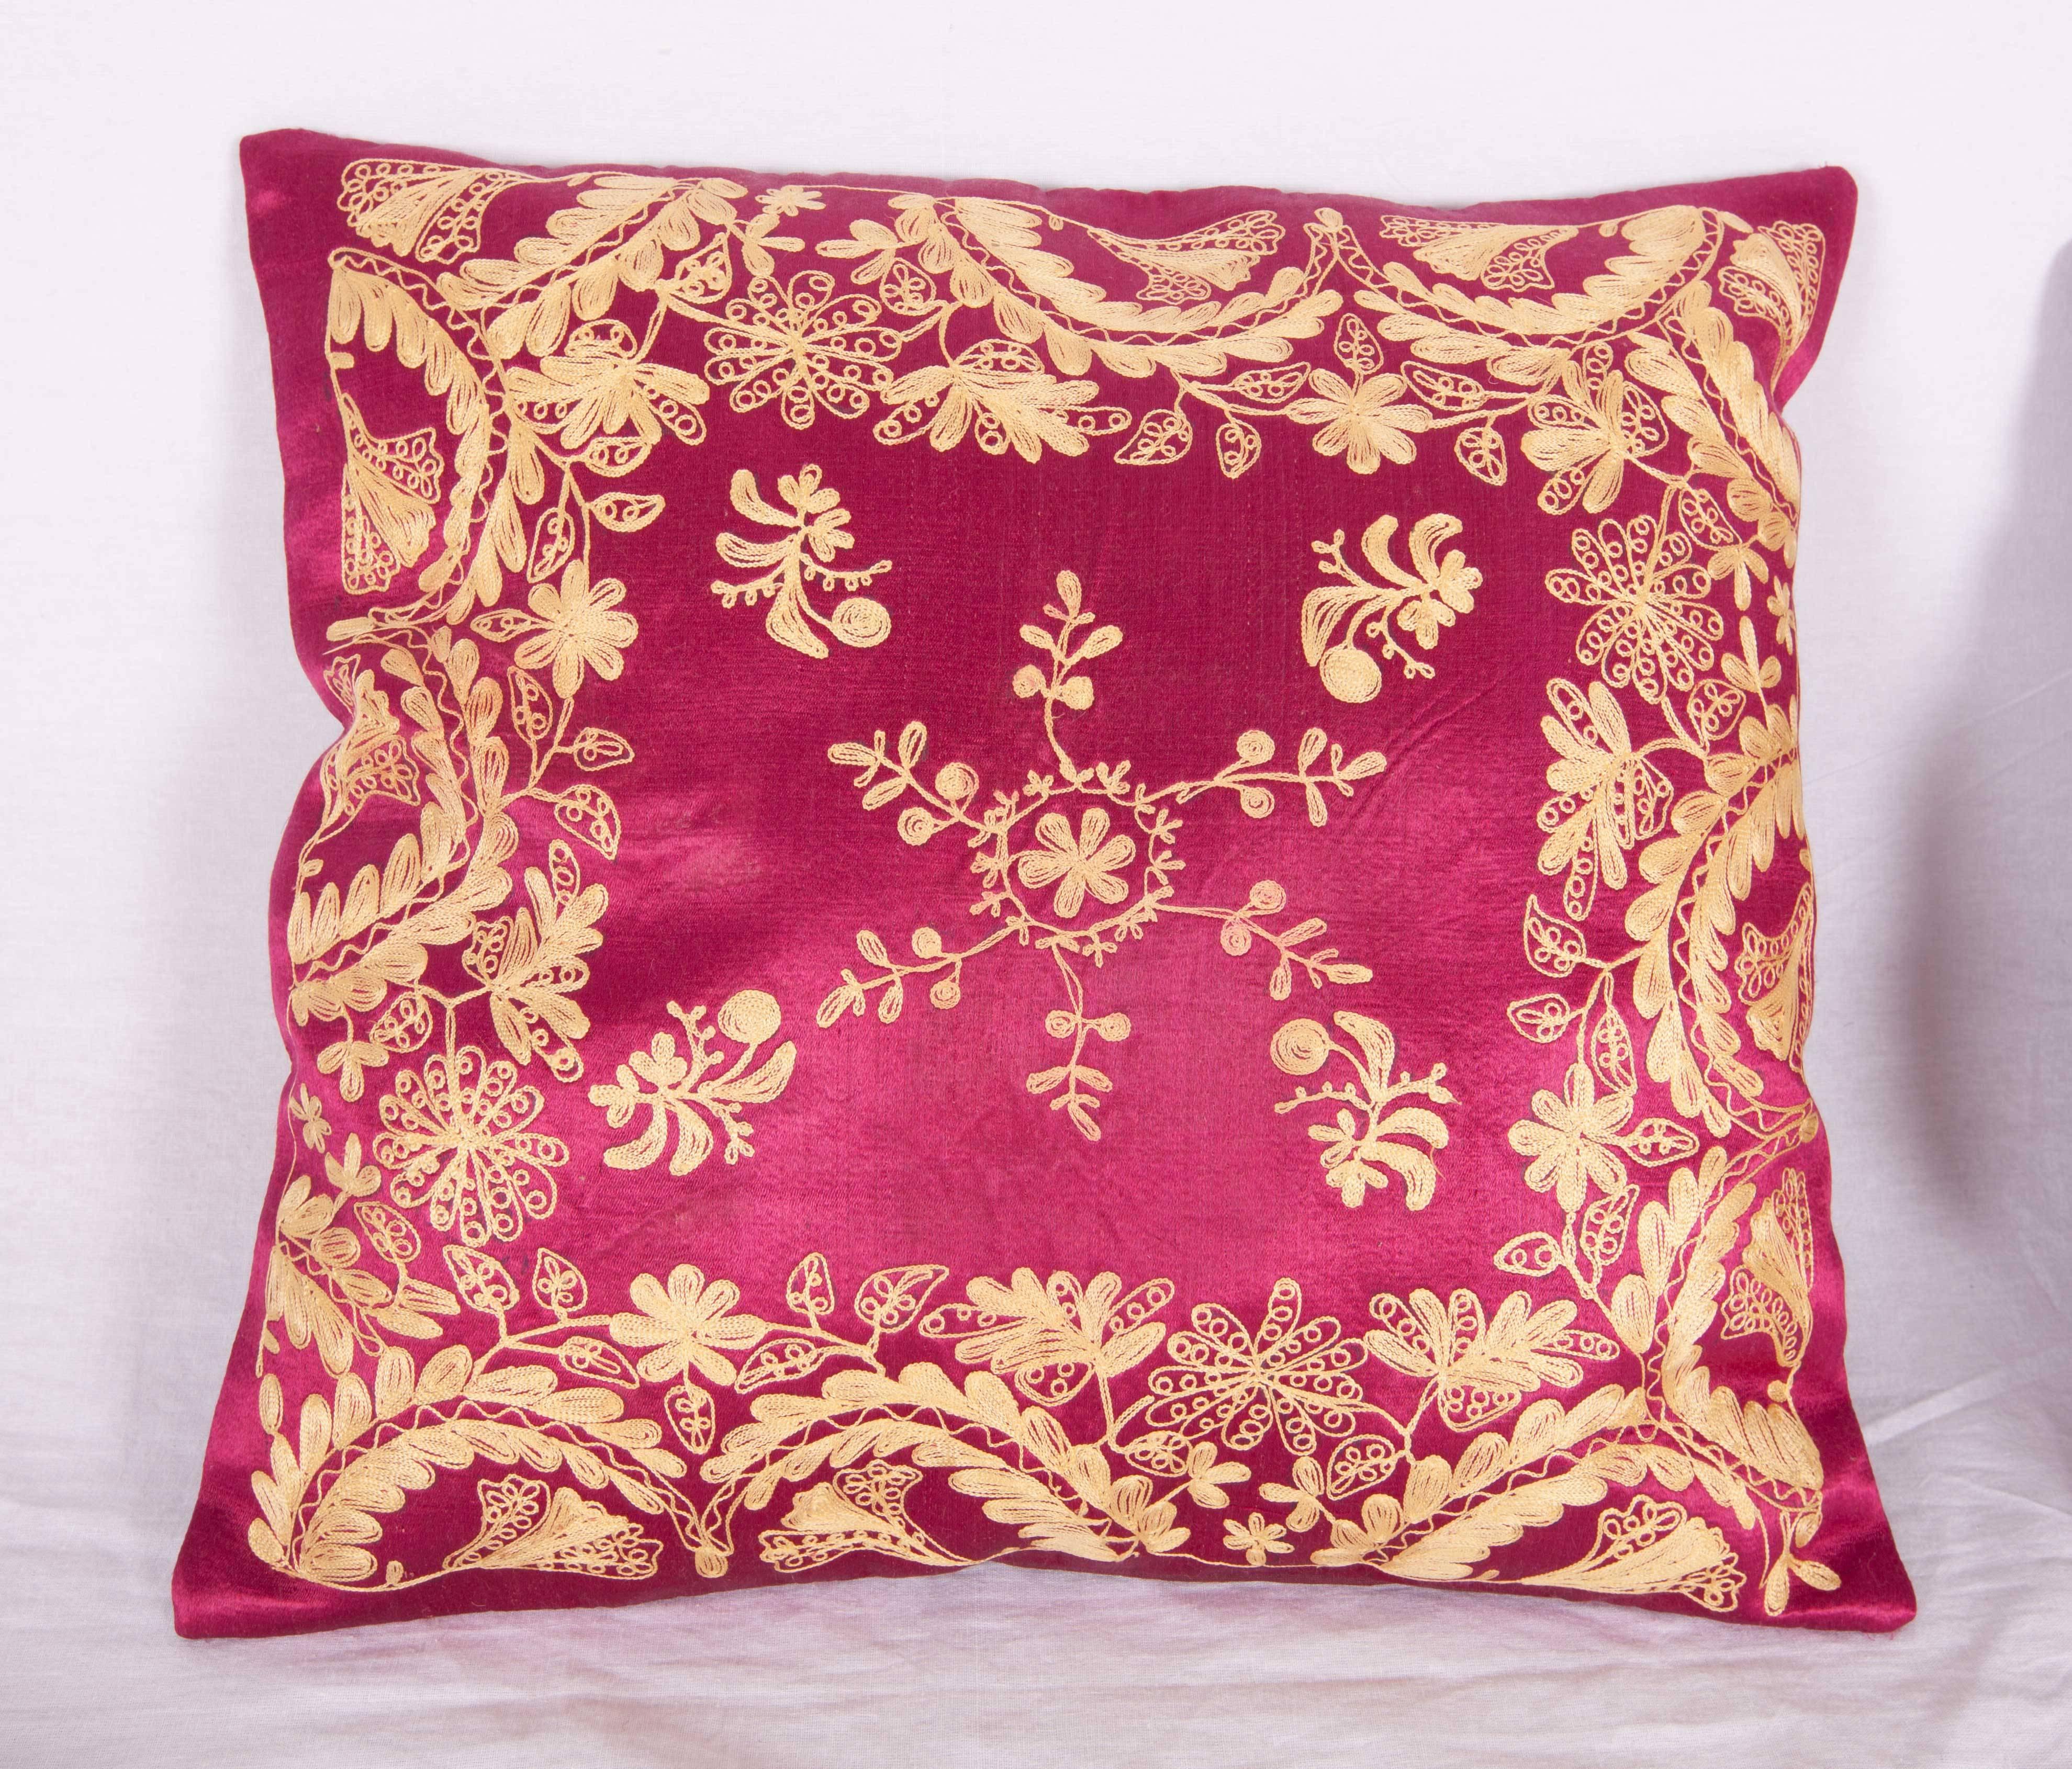 Late 19th / early 20th Century pillow cases , embroidered in silk on a satin silk background. The backing has been replaced with a hand loomed silk and cotton fabric. Insert is not provided but it comes with a bag to accommodate insert material .